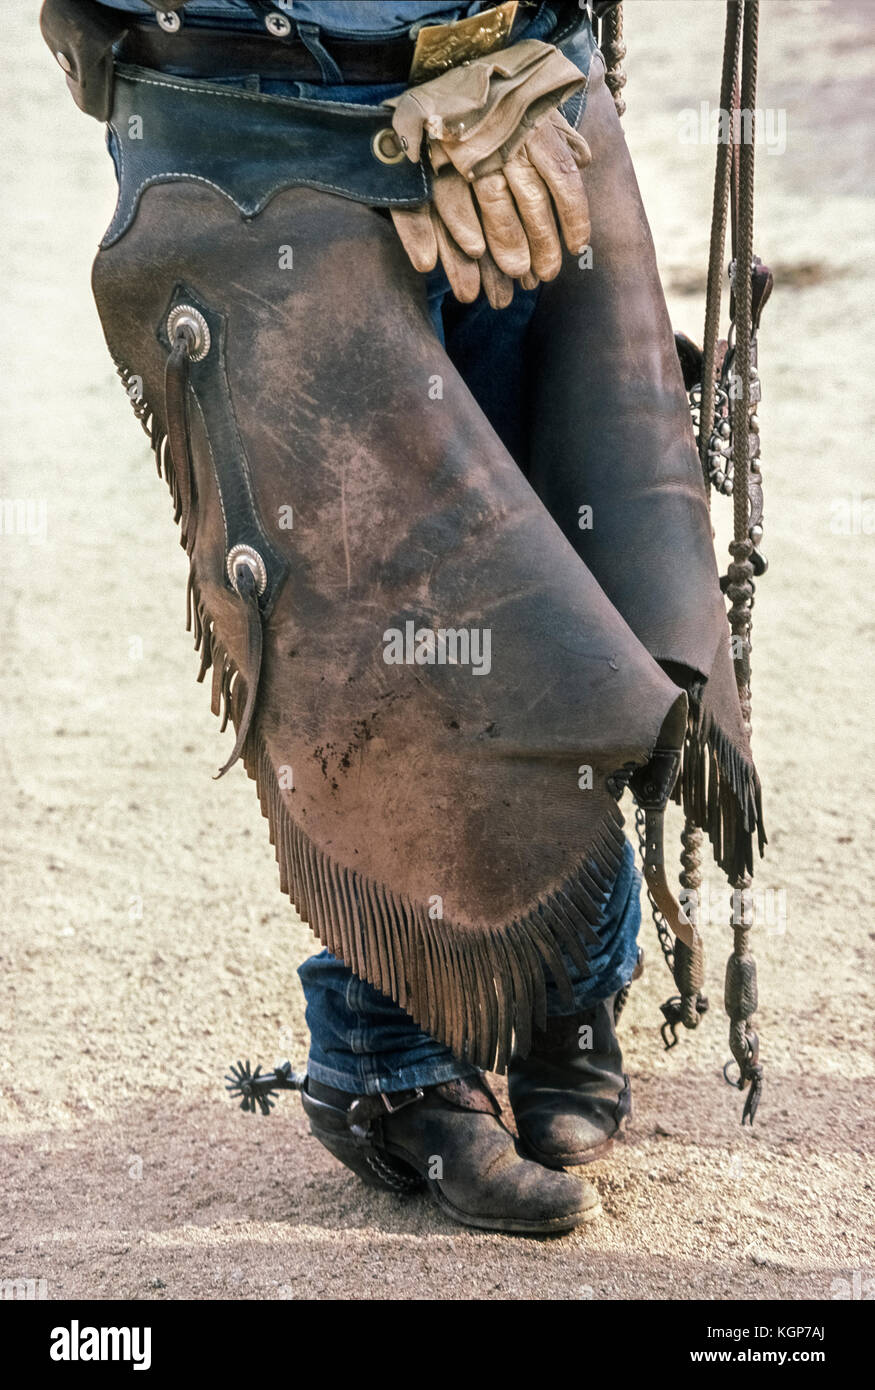 This close-up photo shows the much-used pair of fringed leather chaps worn by an American cowboy in the western state of Arizona, USA. Also part of the veteran wrangler’s wardrobe are a wide belt with a brass buckle, work gloves, blue jeans, leather boots and steel spurs. Dangling at the right is his fancy horse bit and reins. Stock Photo